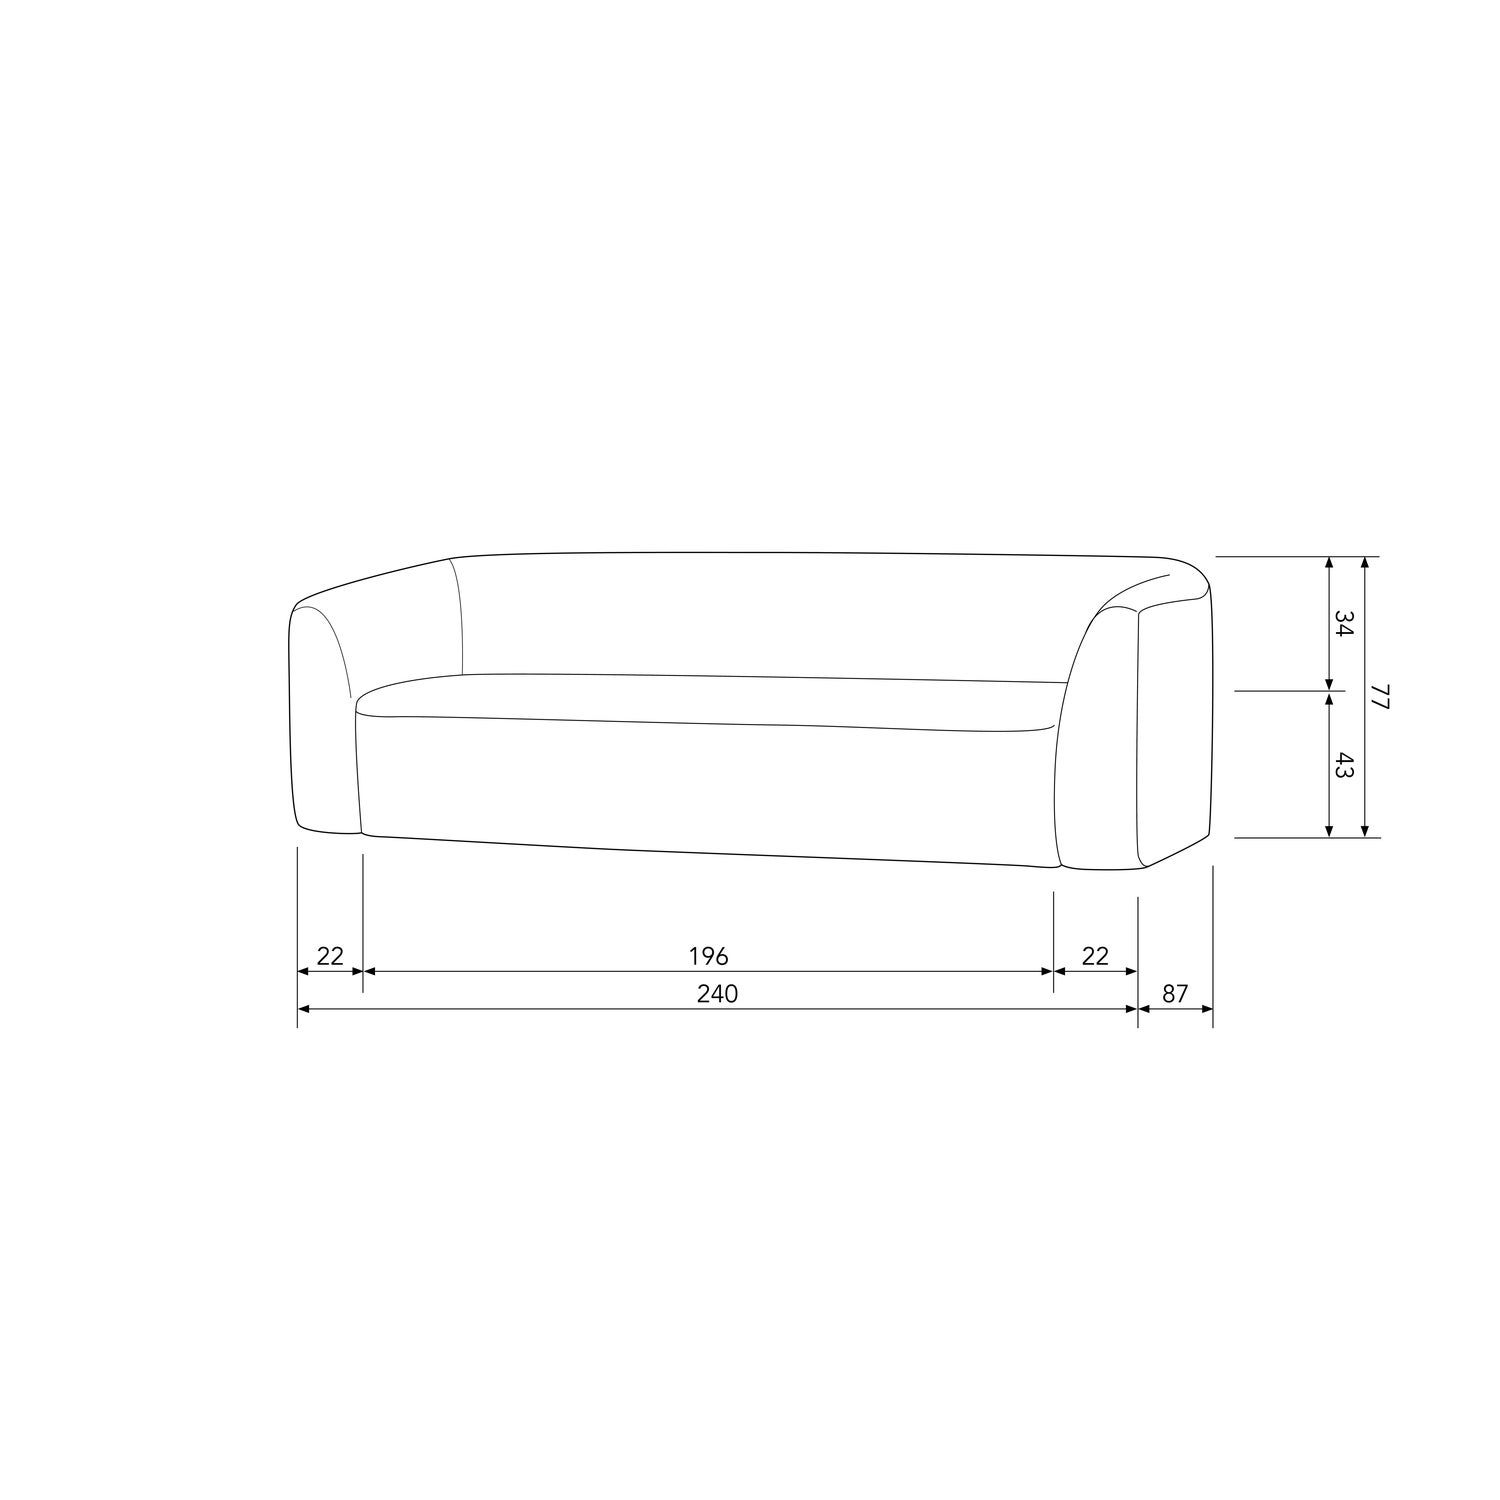 801270-Z-801270-W-801270-P-801270-N-801270-G-801270-B-50_BT_Sloping_3-seater_sofa.jpg?auto=webp&format=png&width=1500&height=1500